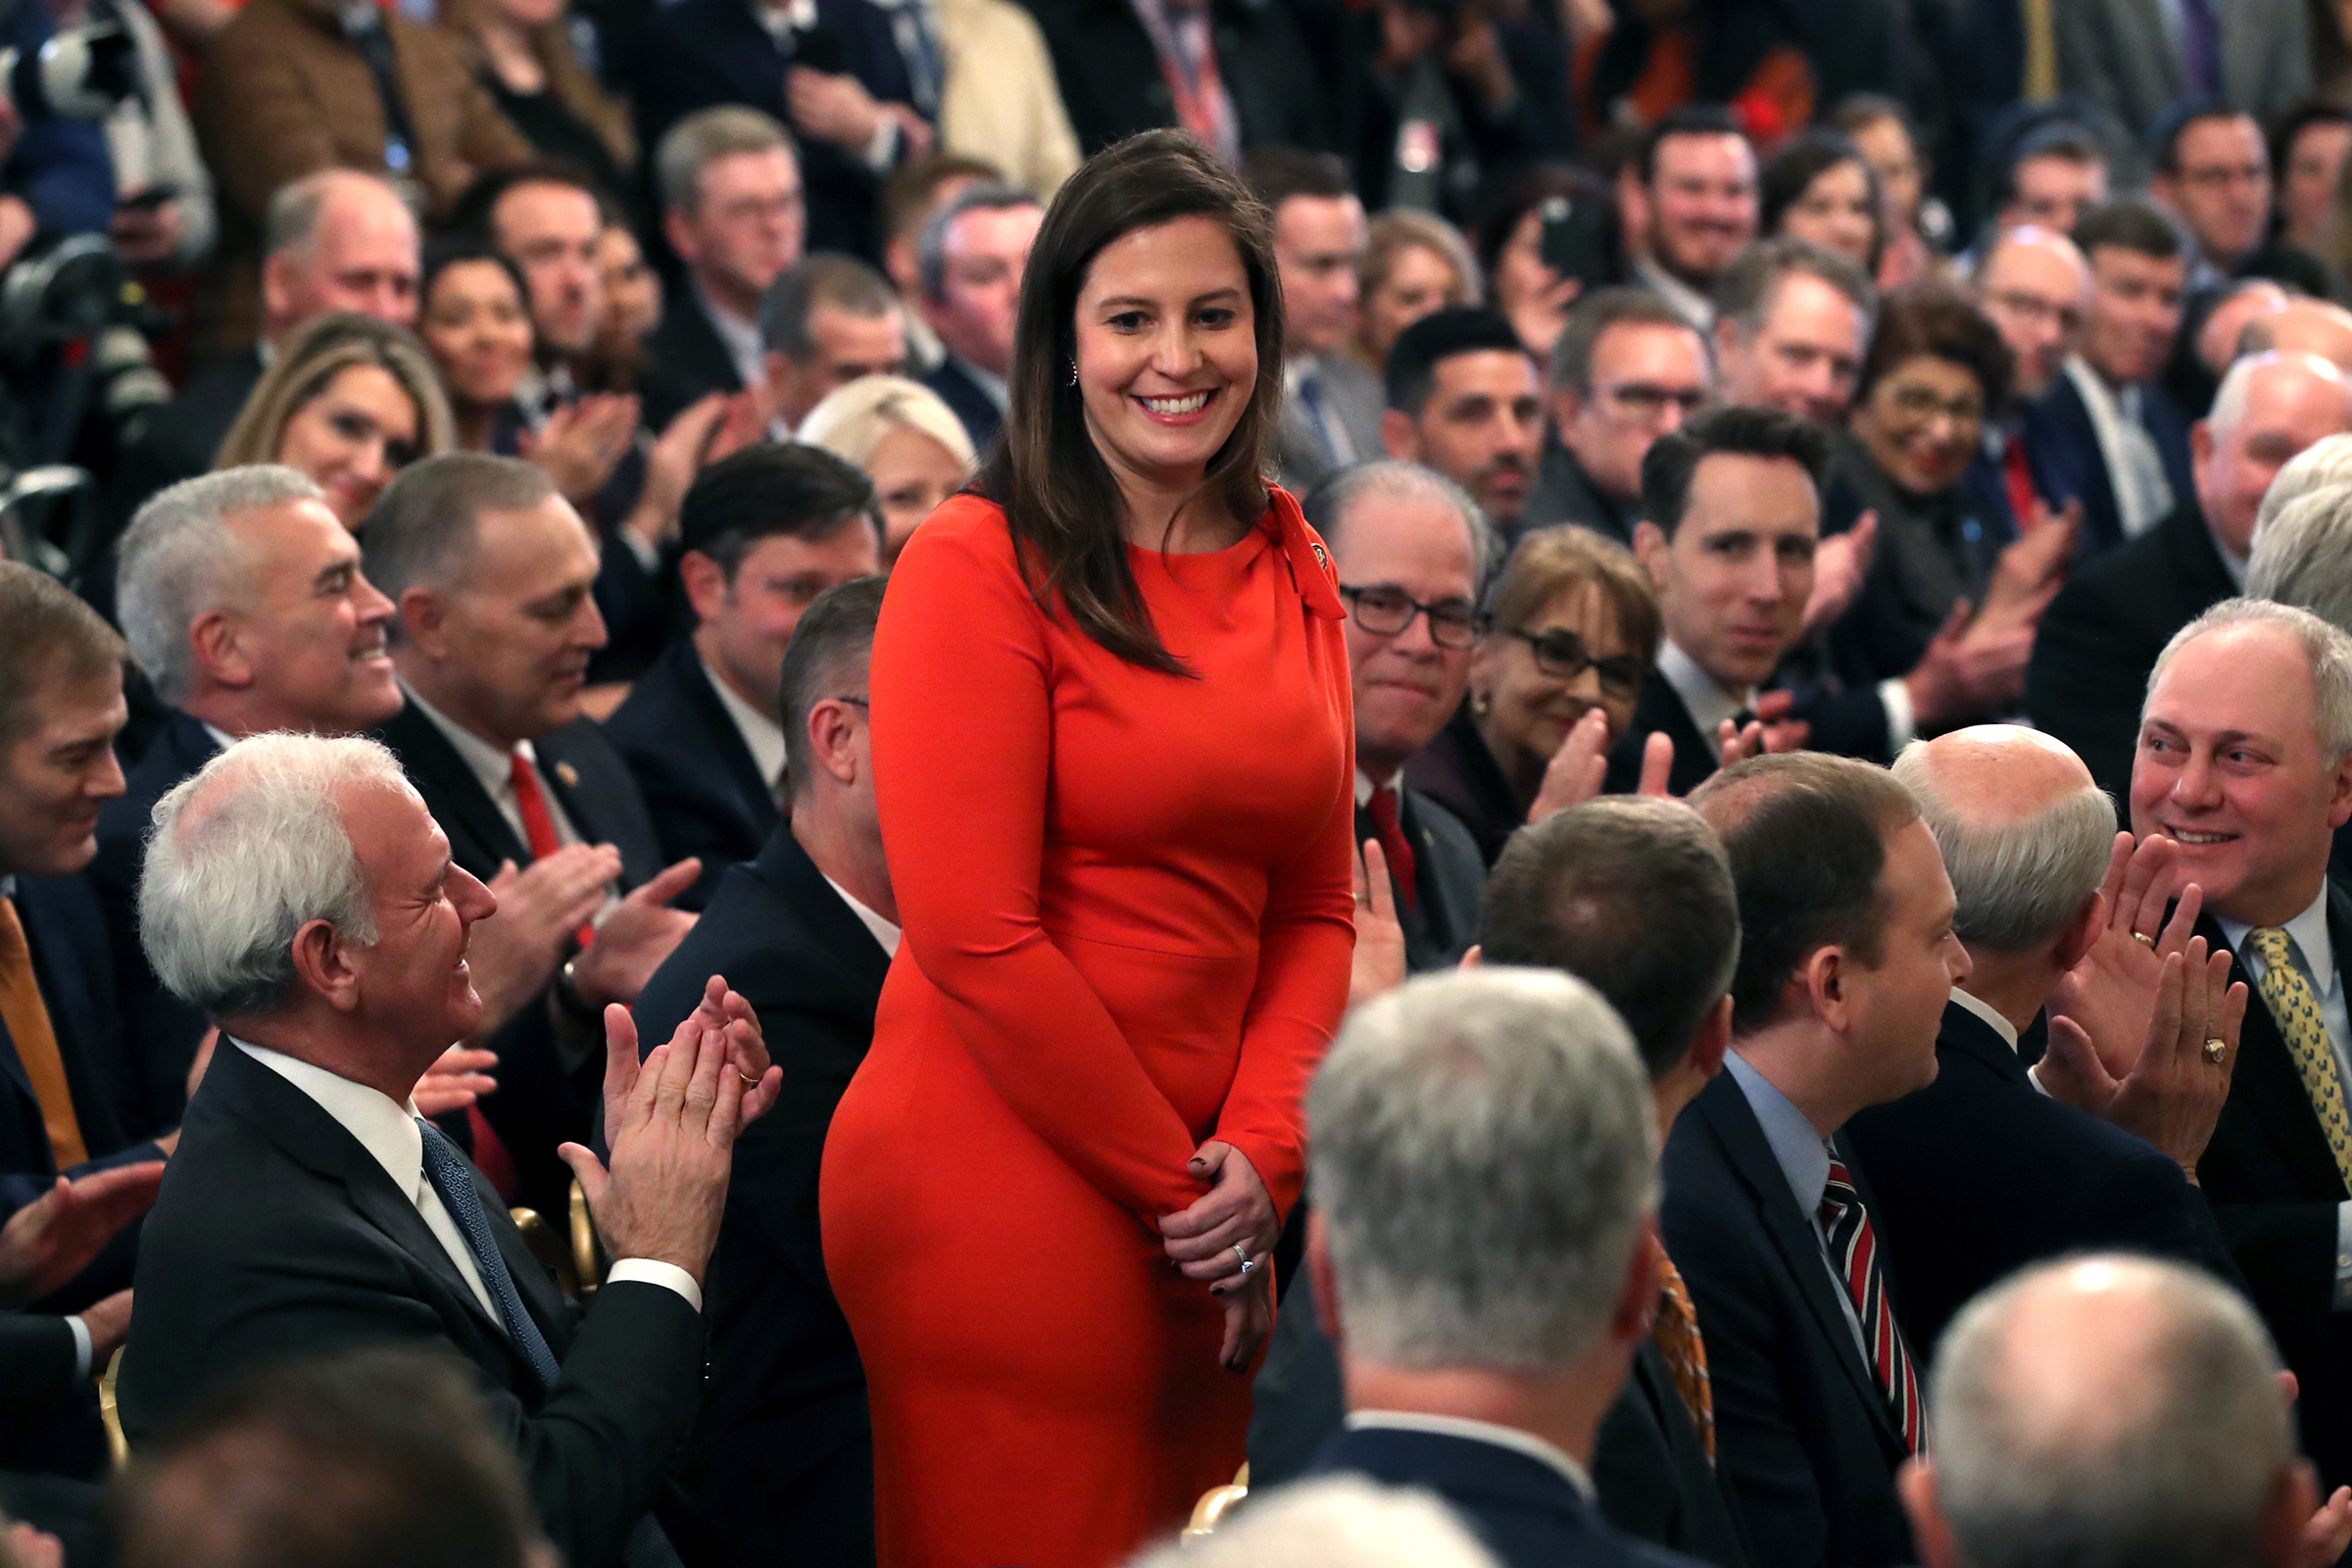 Elise Stefanik stands as she's acknowledged by former President Donald Trump as he speaks one day after the U.S. Senate acquitted him on two articles of impeachment, in the East Room of the White House, Feb. 6, 2020 (Mark Wilson—Getty Images)